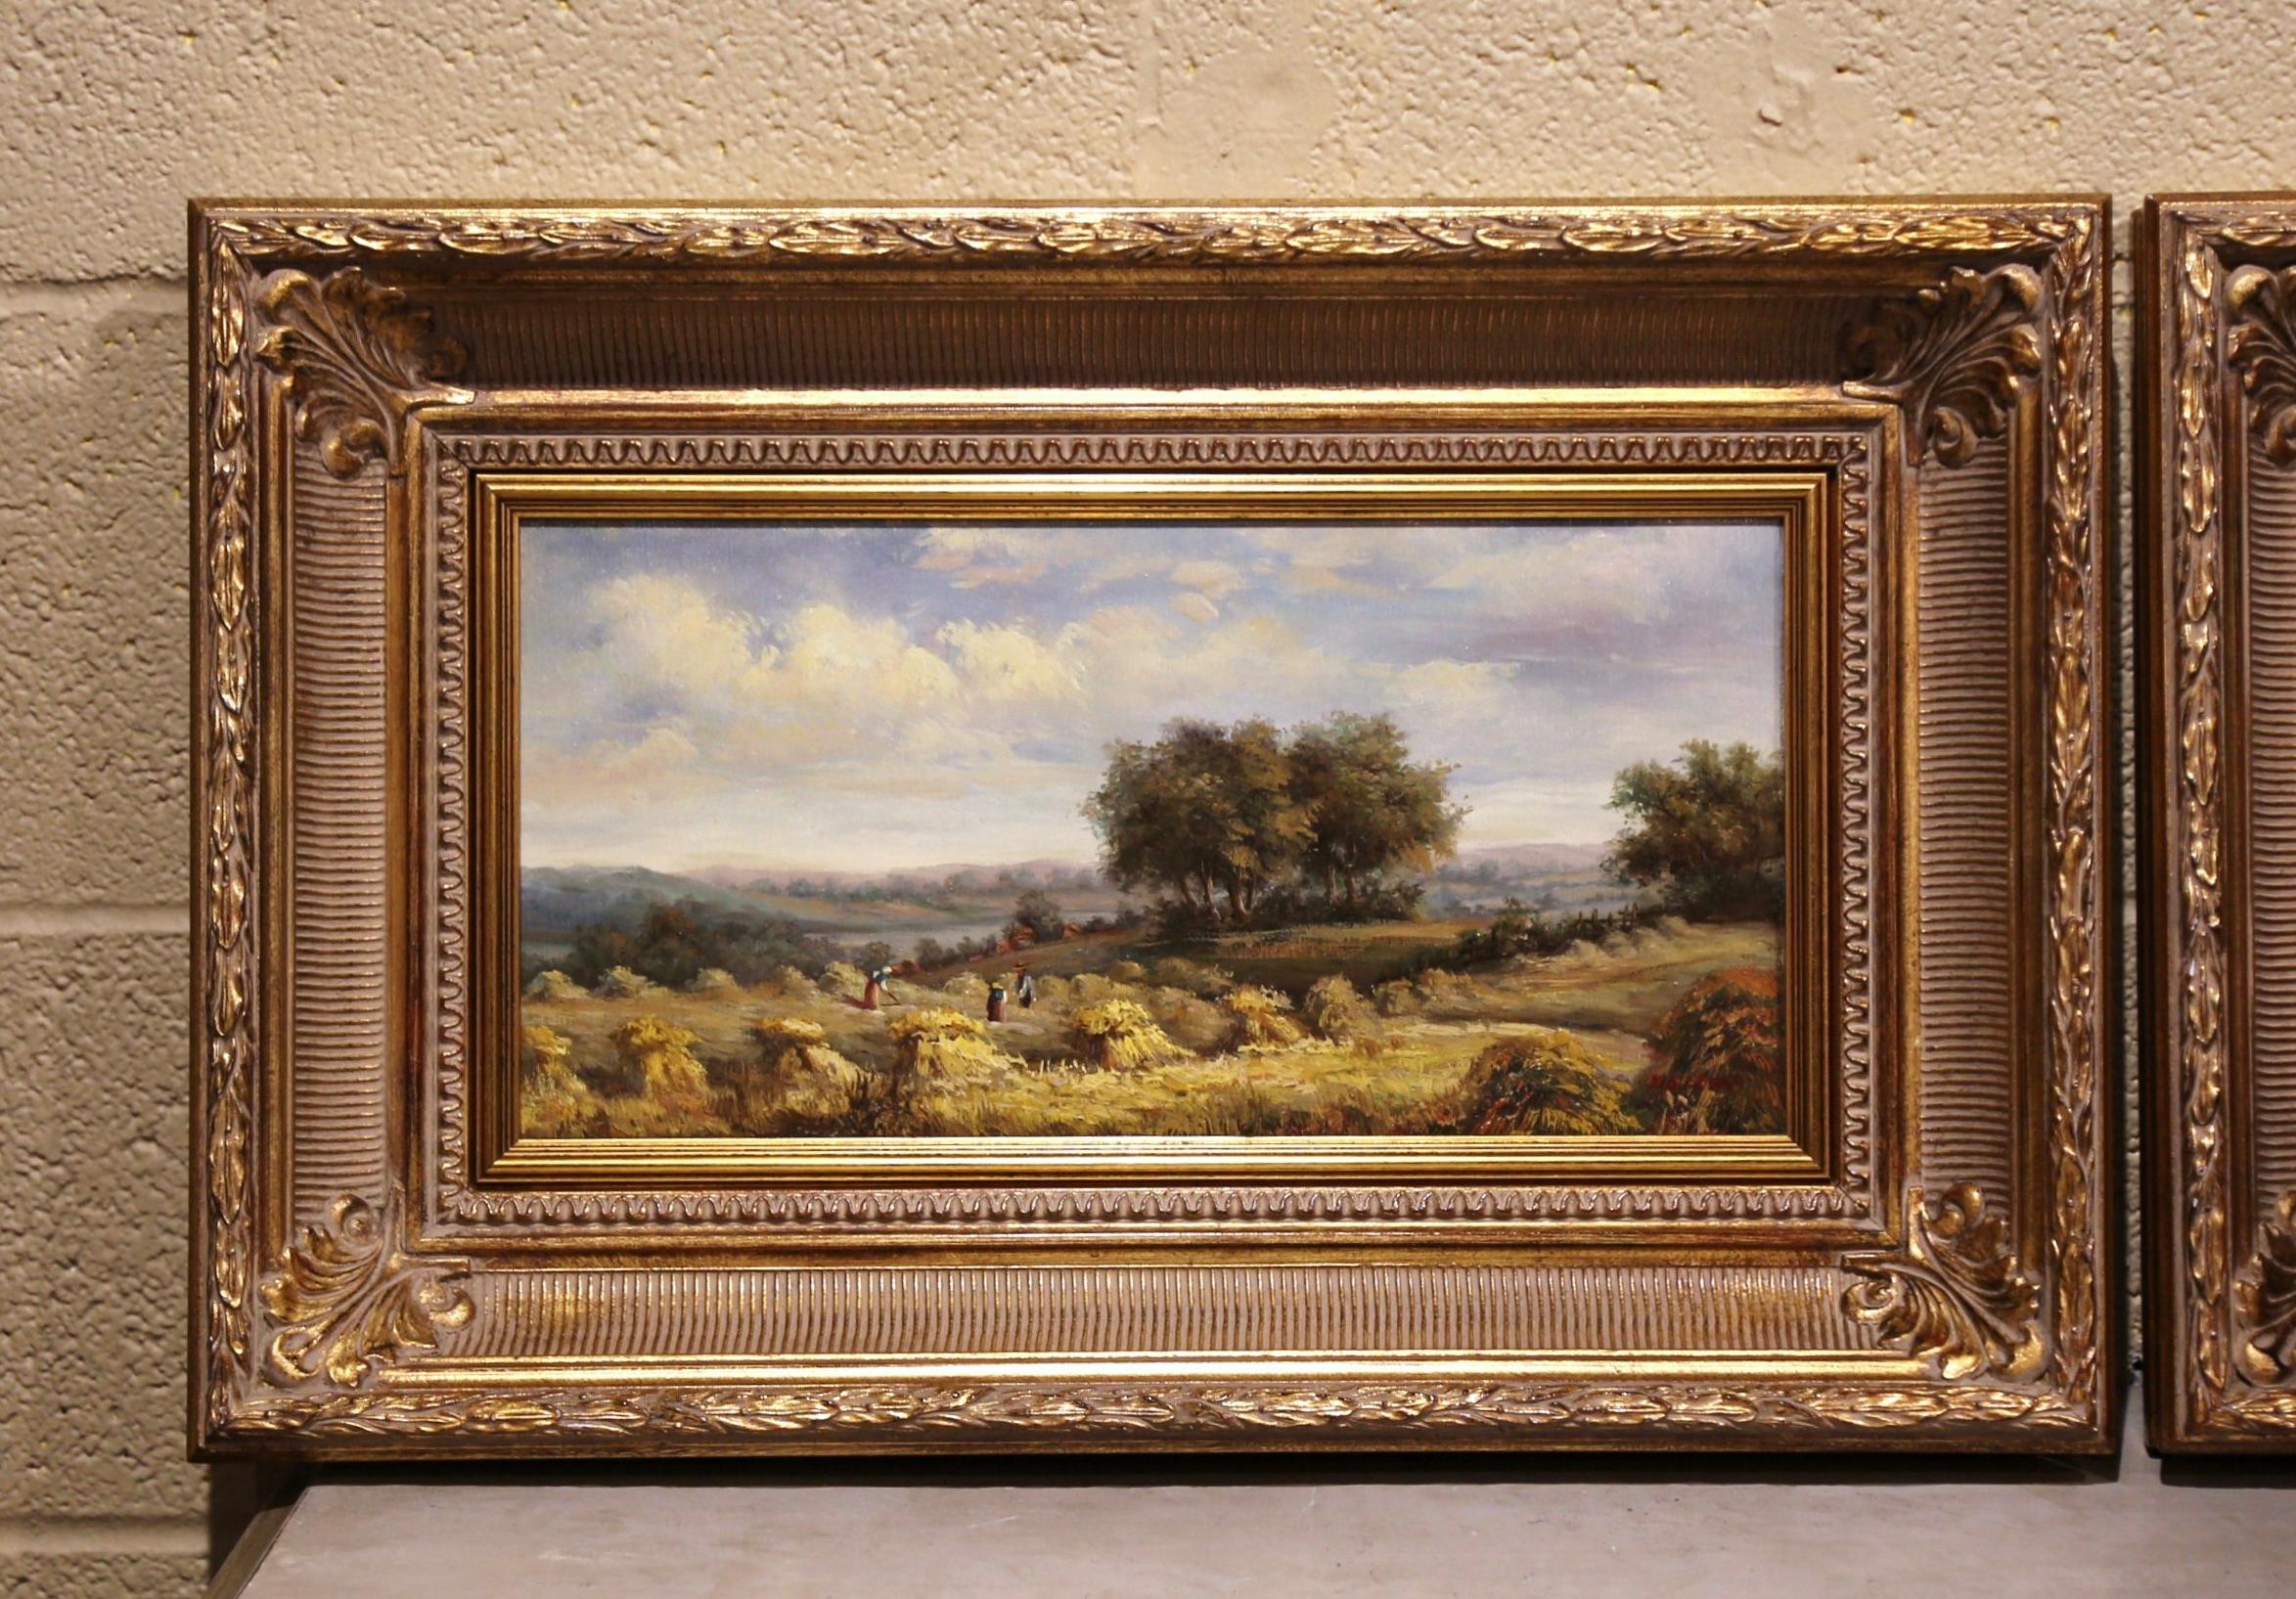 Hand-Carved Pair of Midcentury French Pastoral Oil on Canvas Paintings in Gilt Frames